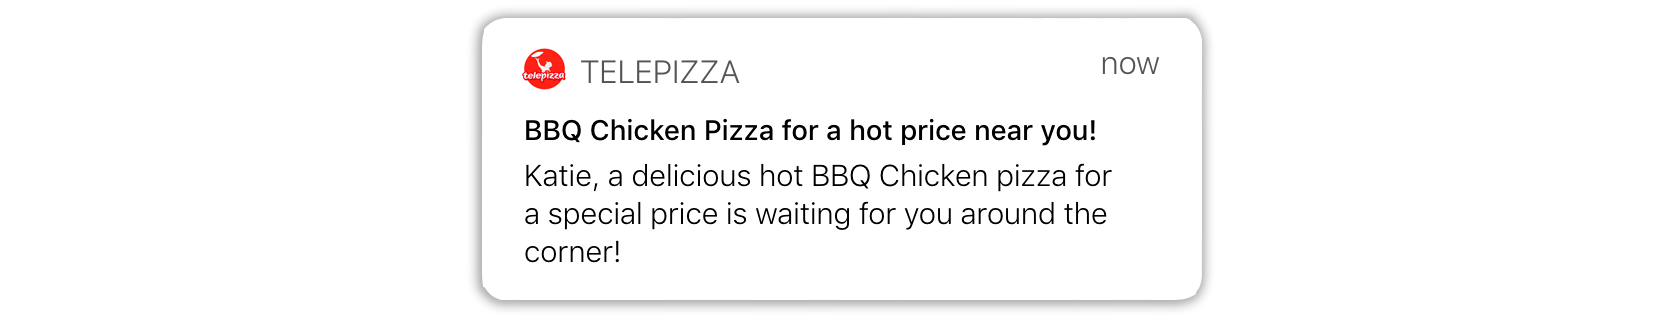 Telepizza sends push notifications with Pushwoosh